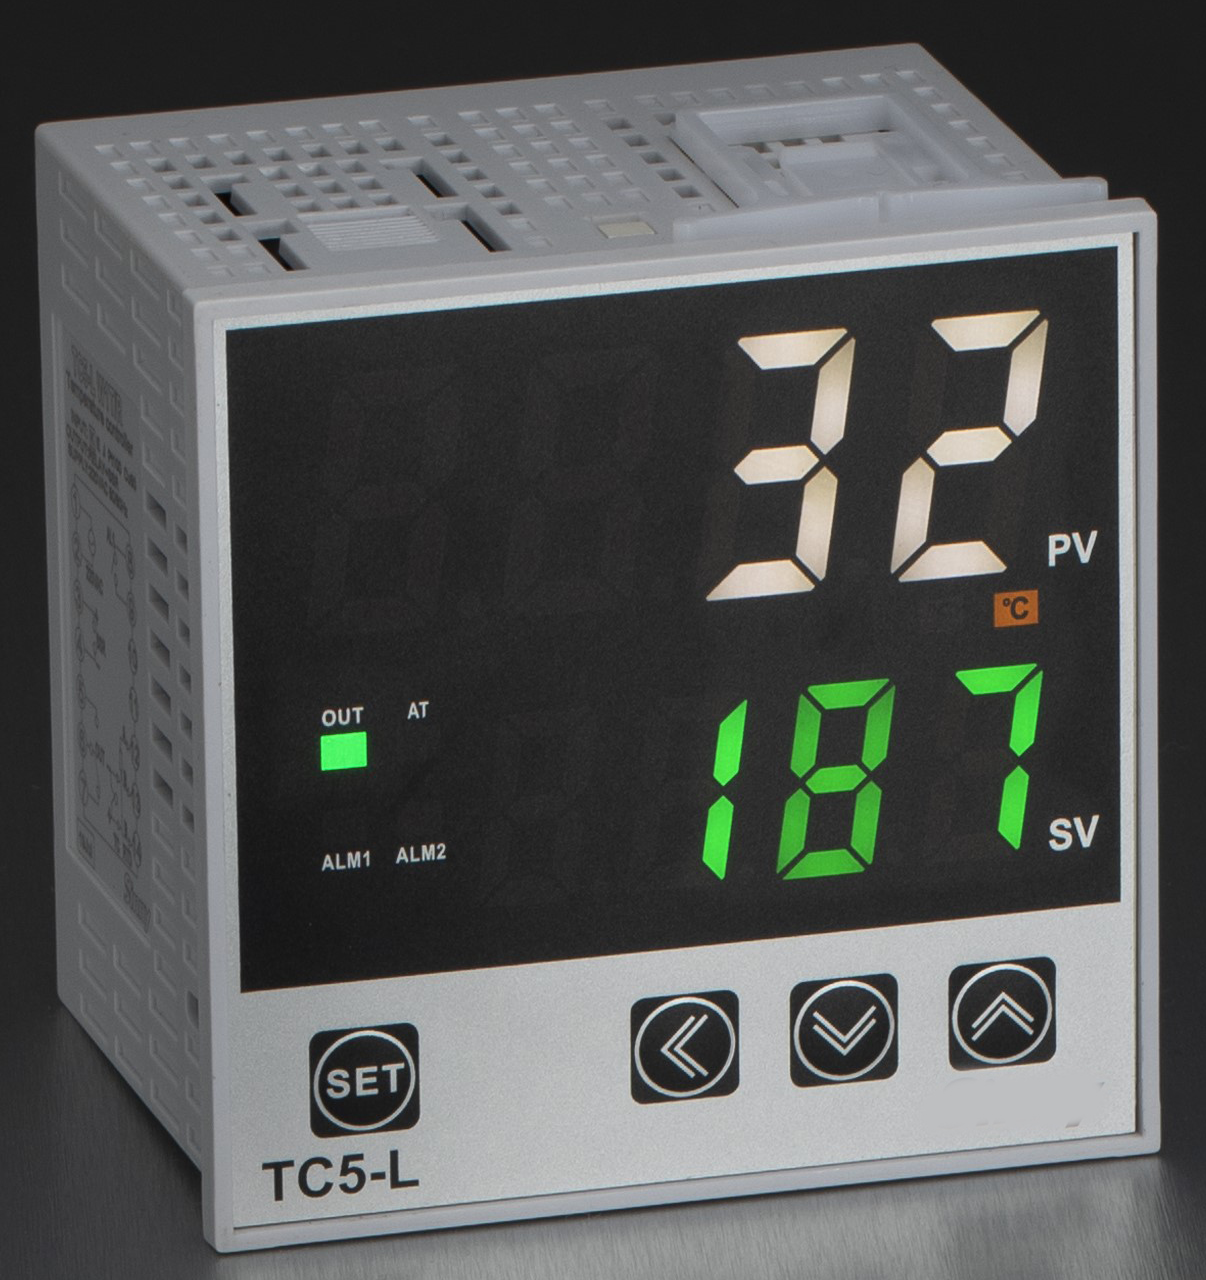 FC5-L-1A-2-G-4 PID Controller, 24VDC with 2 x Relay Alarms, E,J,N,T,S,R,B Thermocouple, Linear Current/Voltage and  PT100/Cu20 RTD Input, 96x96mm,4-20mA Output